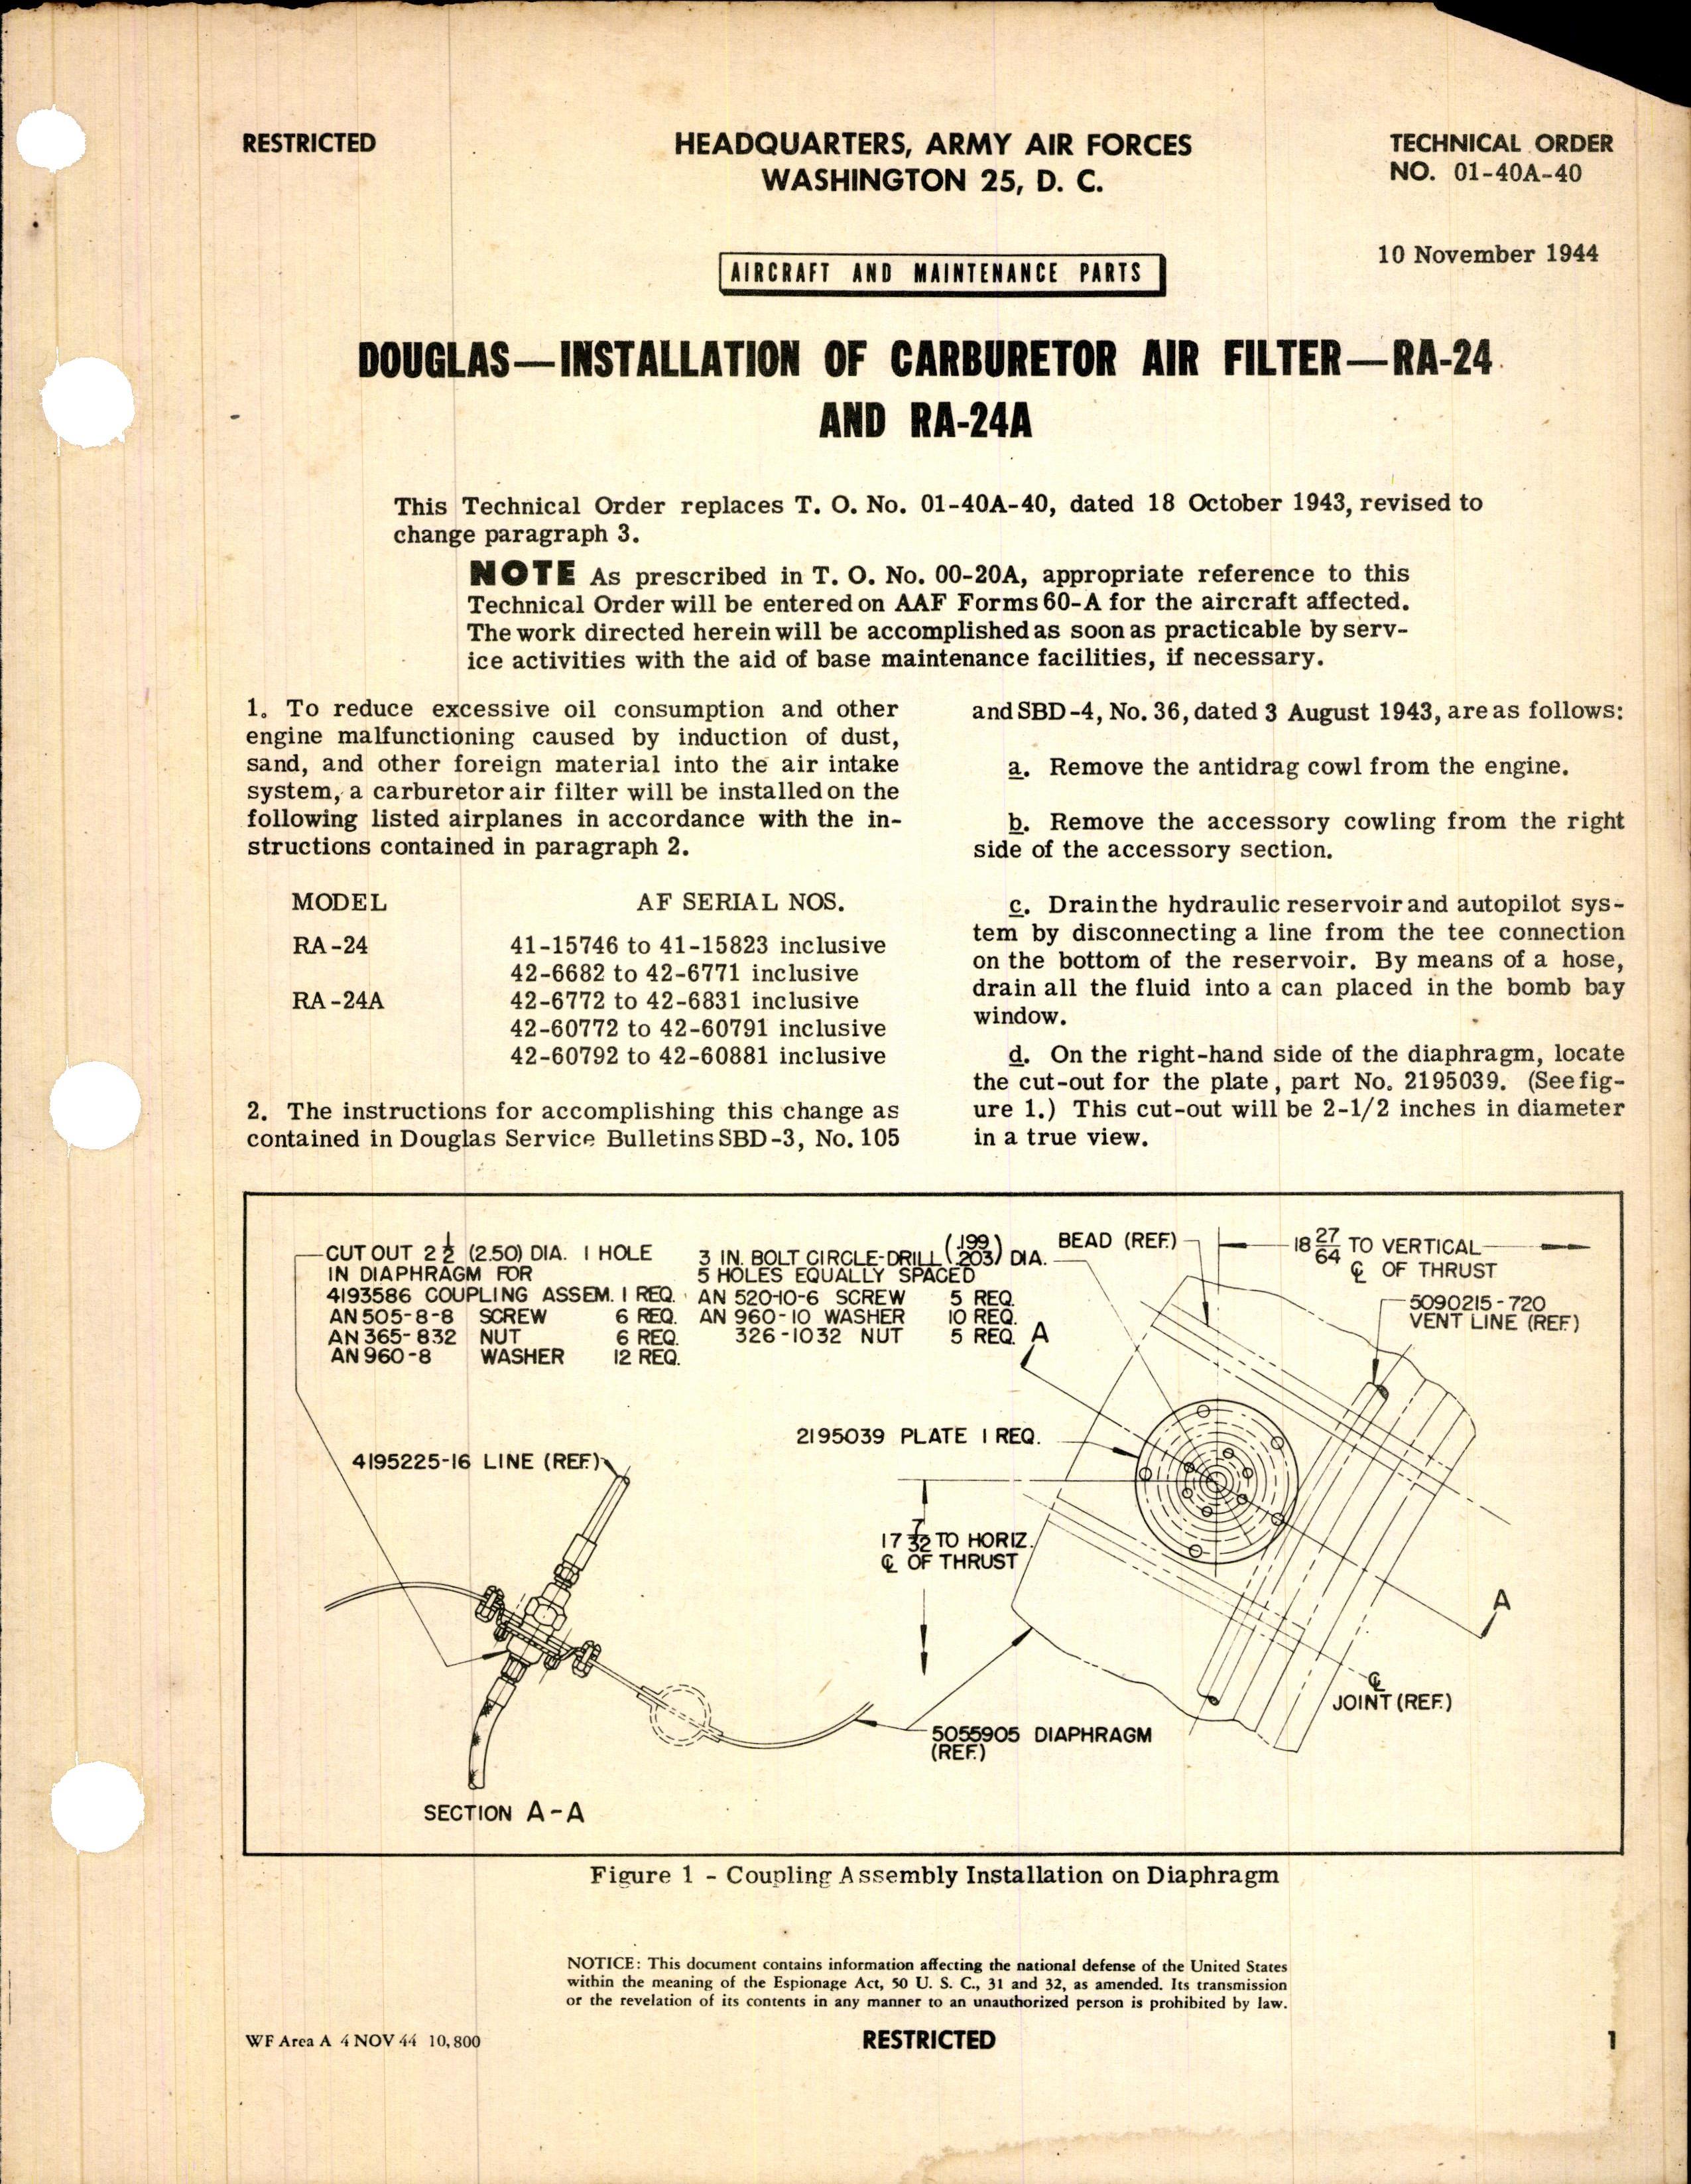 Sample page 1 from AirCorps Library document: Installation of Carburetor Air Filter for RA-24 and RA-24A